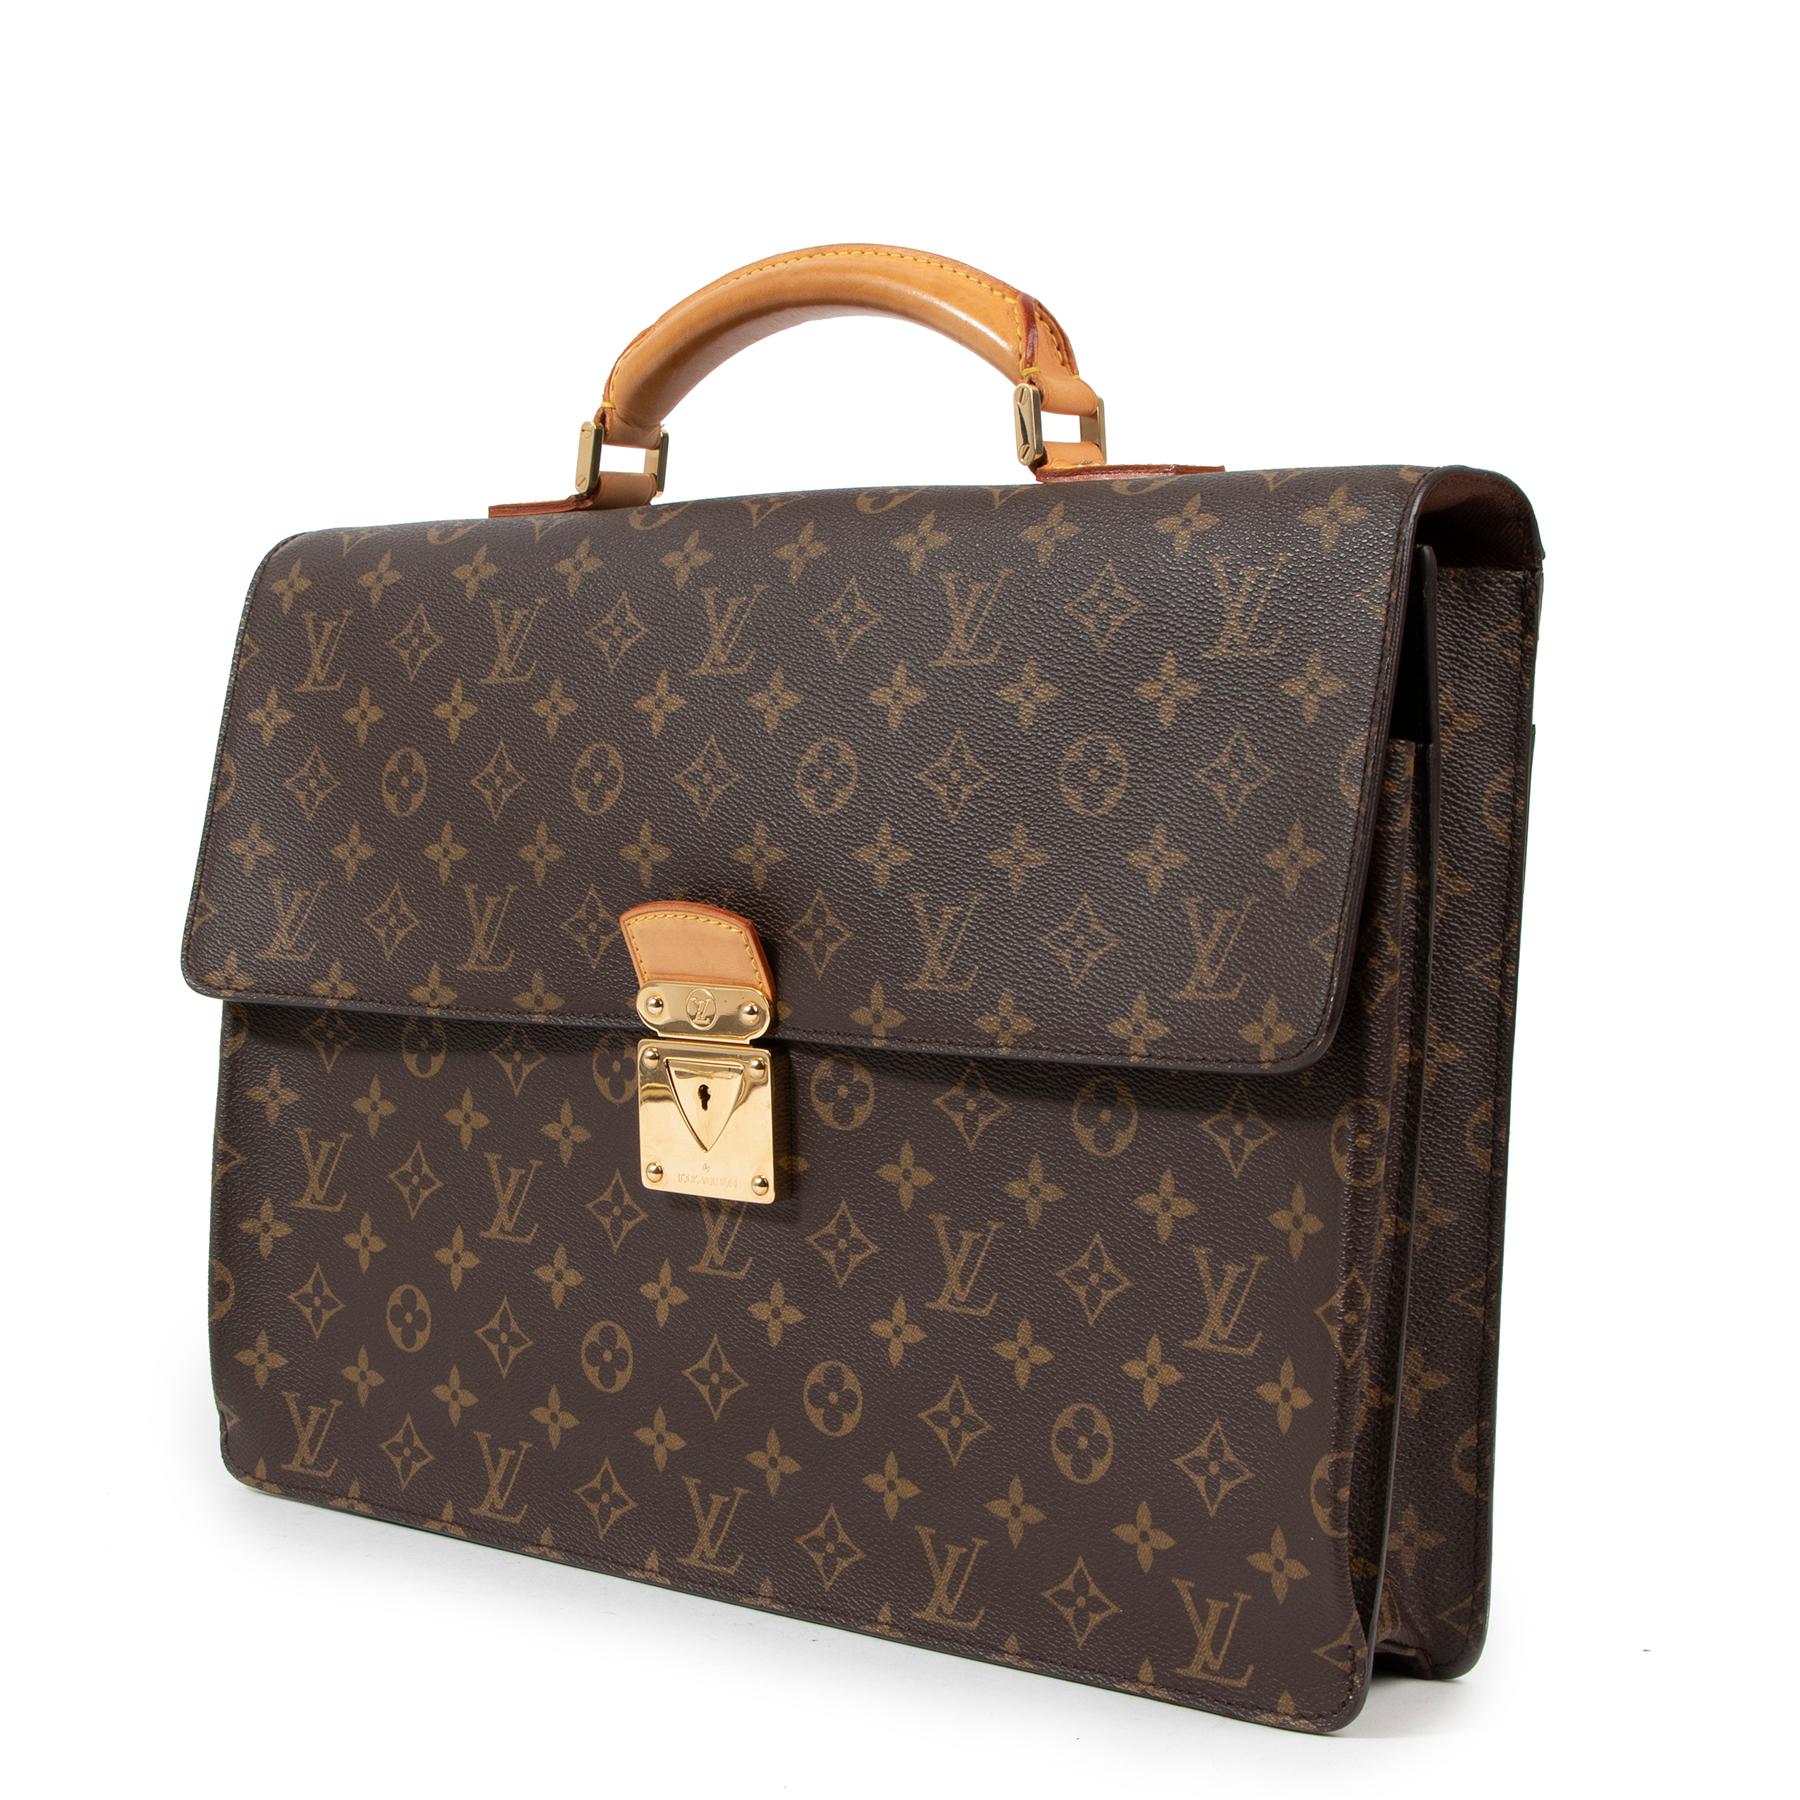 Crafted in iconic Monogram canvas, the sleek and sophisticated S-Lock Briefcase features an array of stylish details, from the gold push lock styled after a historic Louis Vuitton trunk lock to the study leather top handle. A secure and practical